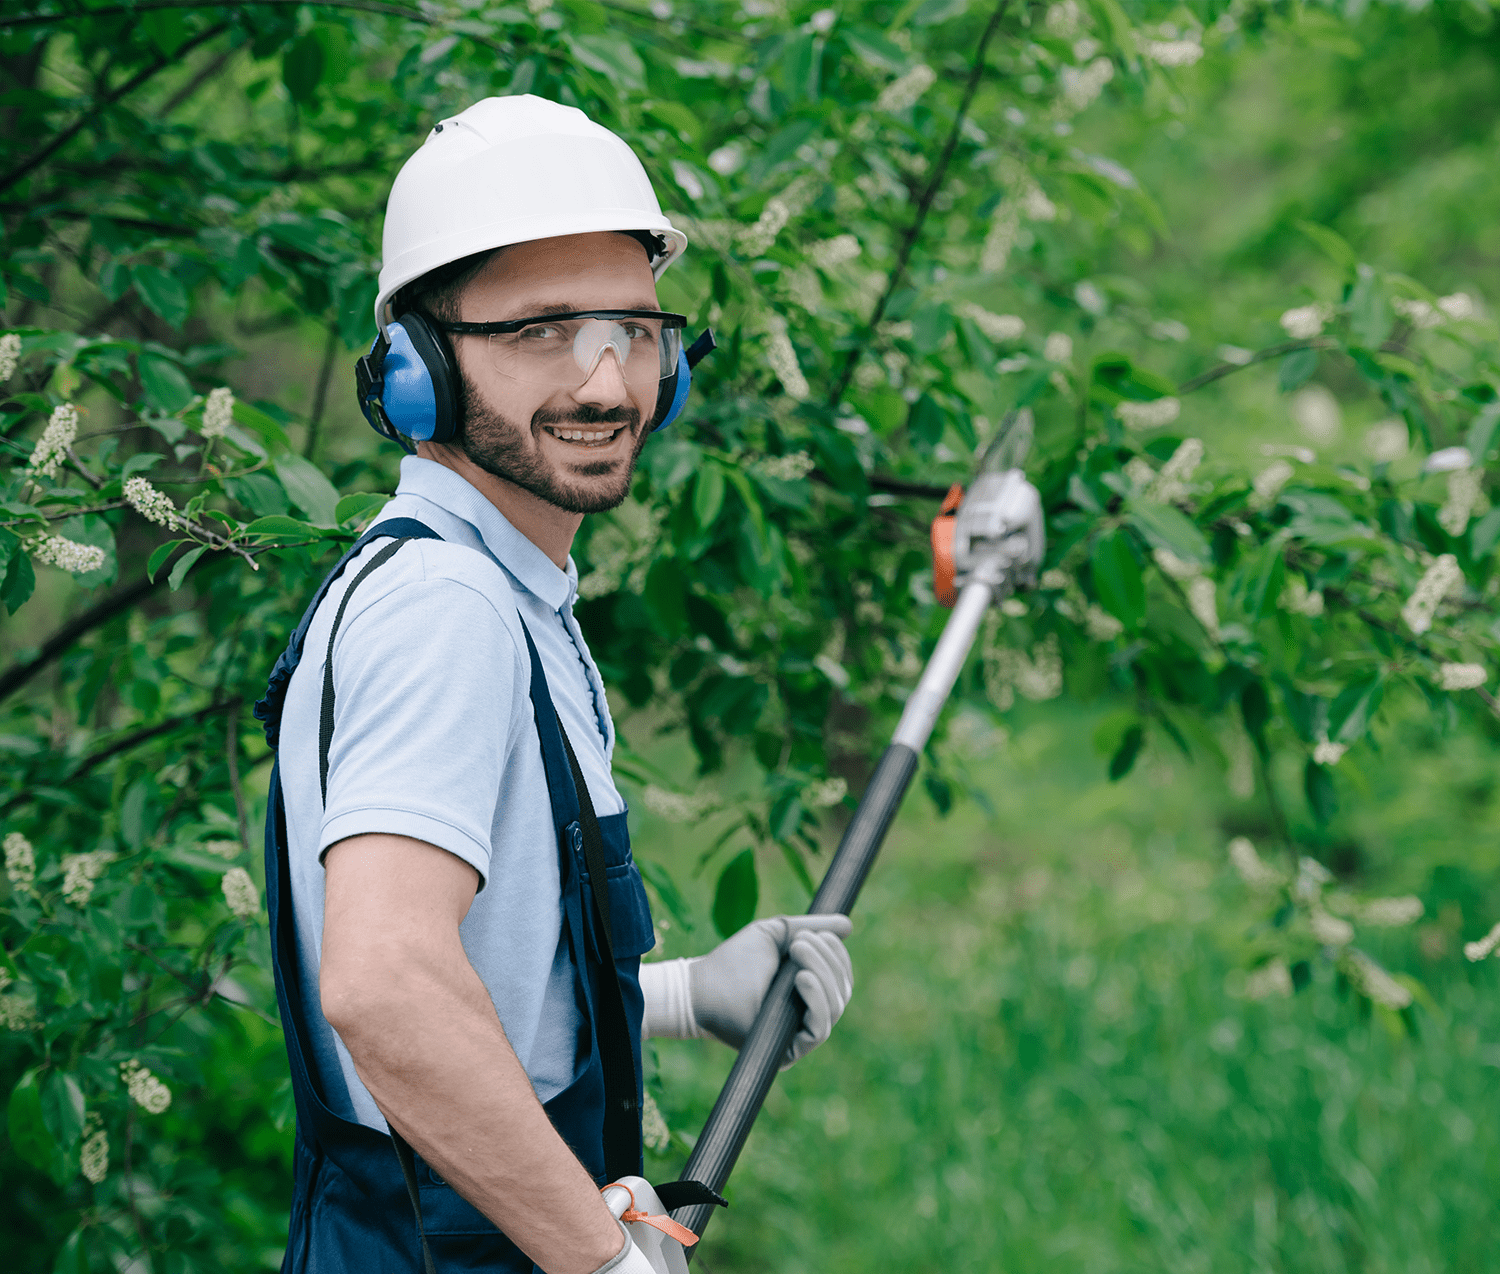 Tree Services and Landscaping | Real Time Marketing